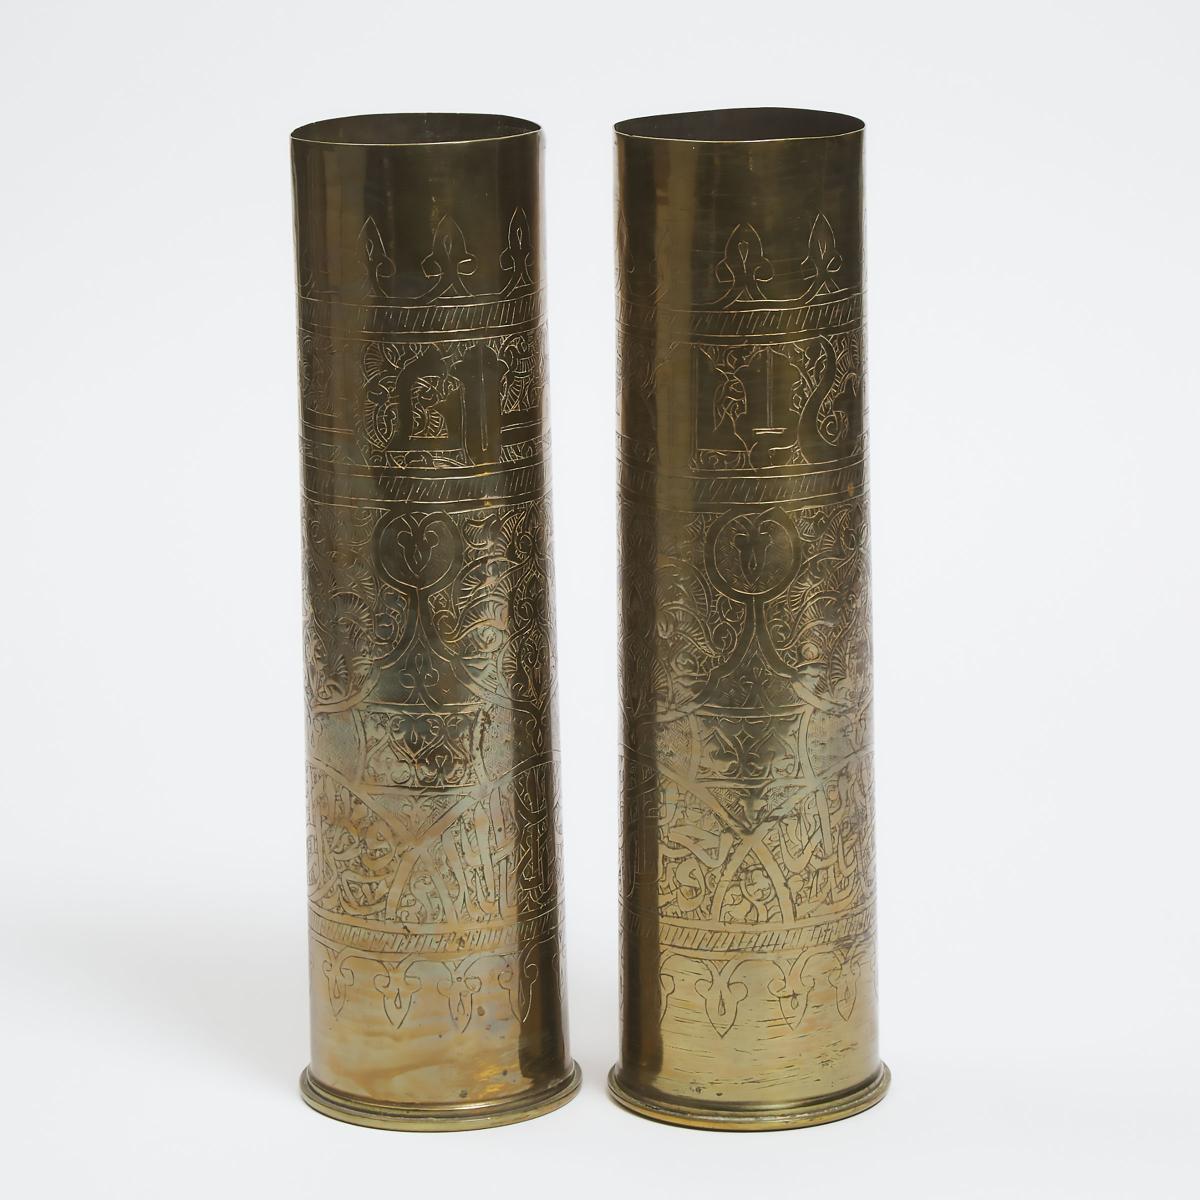 Pair of Middle Eastern 'Trench Art' Shell Casing Vases, early 20th century, each height 12.5 in — 31 - Image 2 of 2